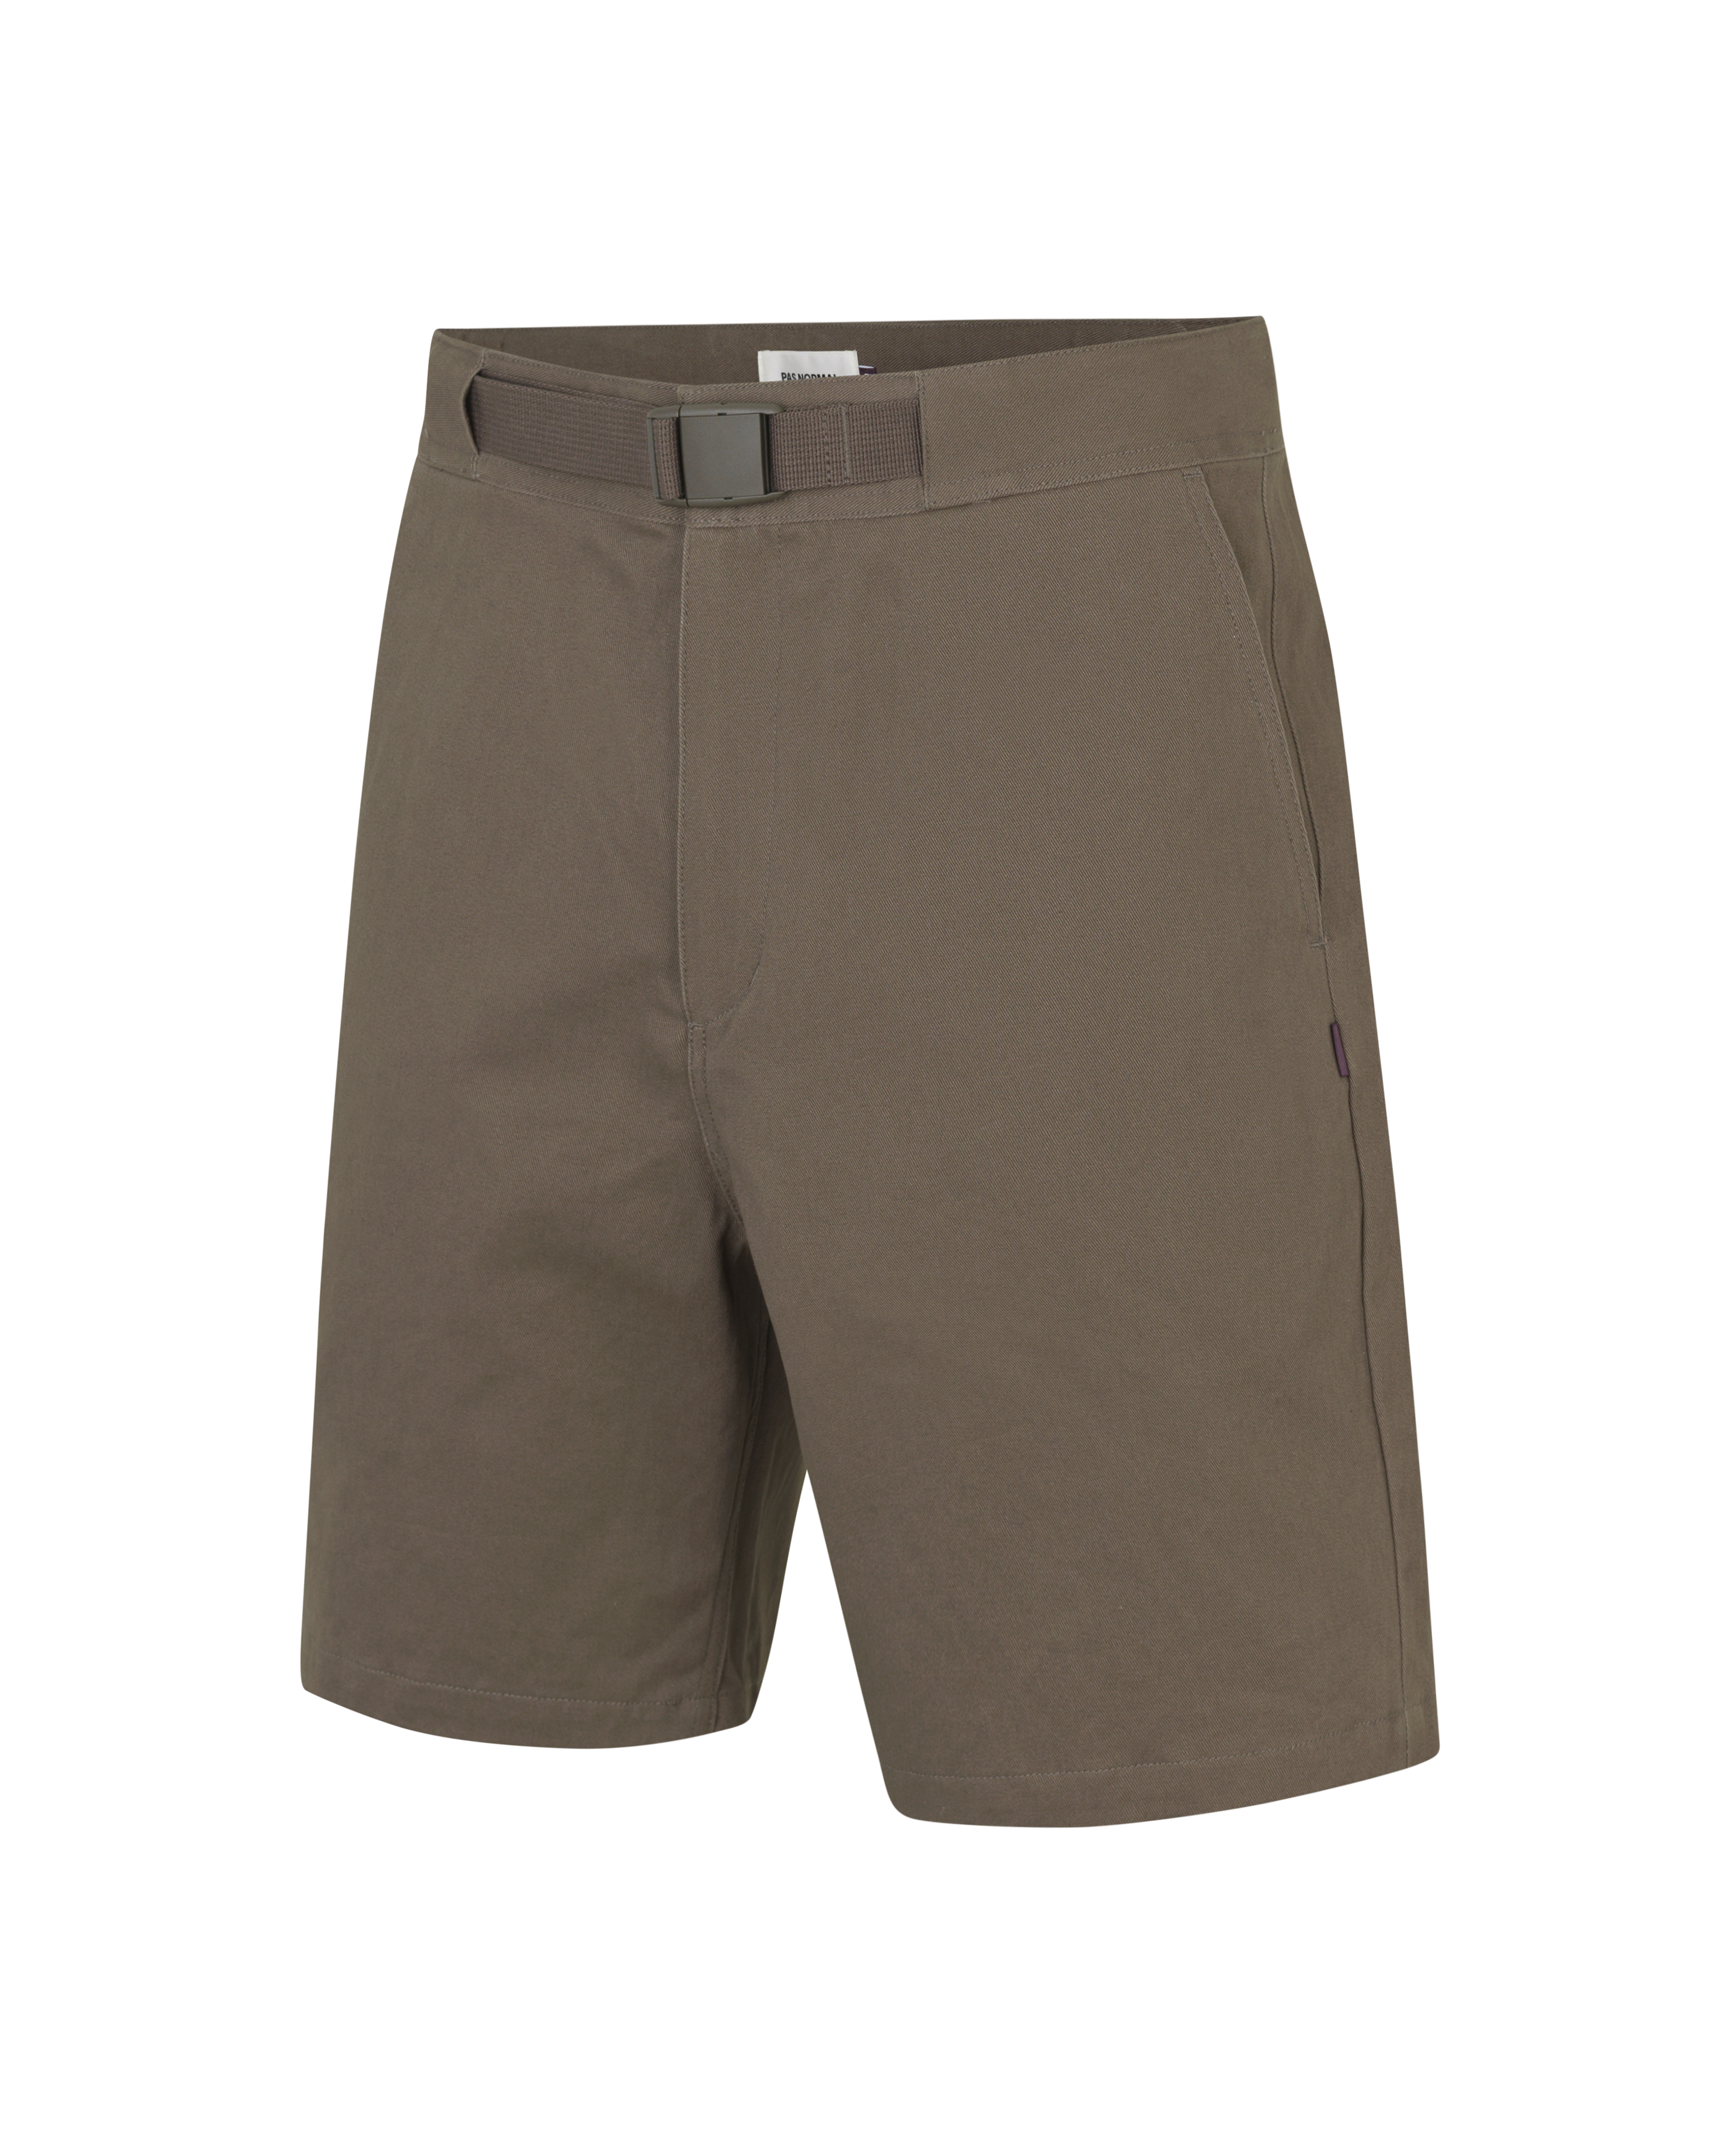 Off-Race Cotton Twill Shorts - Ash Brown